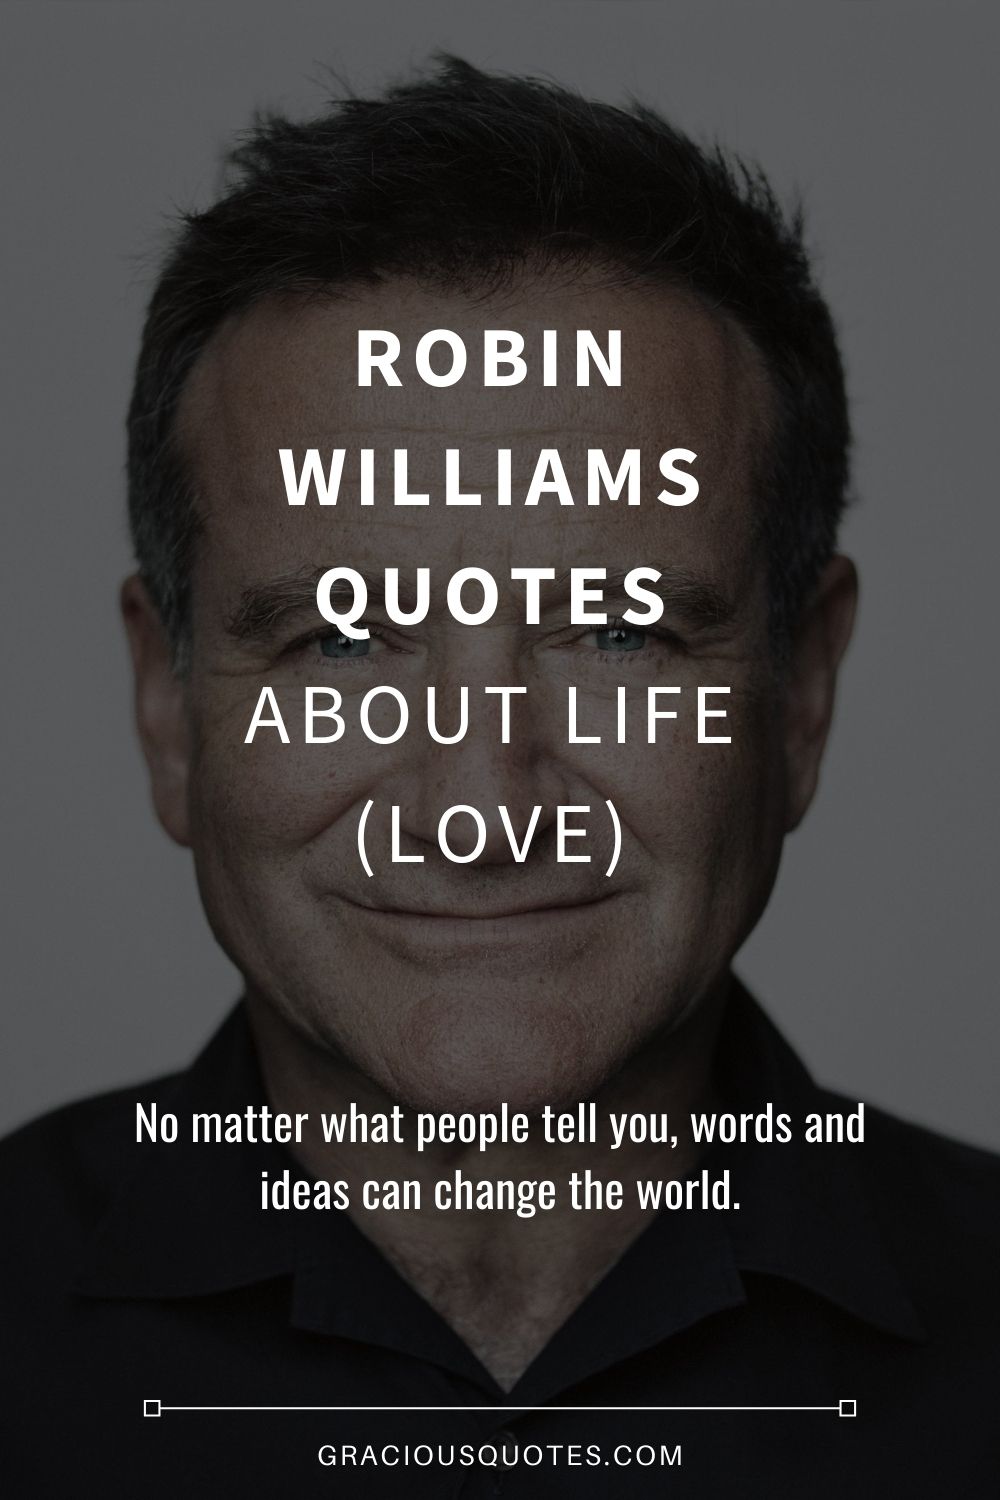 Robin Williams Quotes About Life (LOVE) - Gracious Quotes